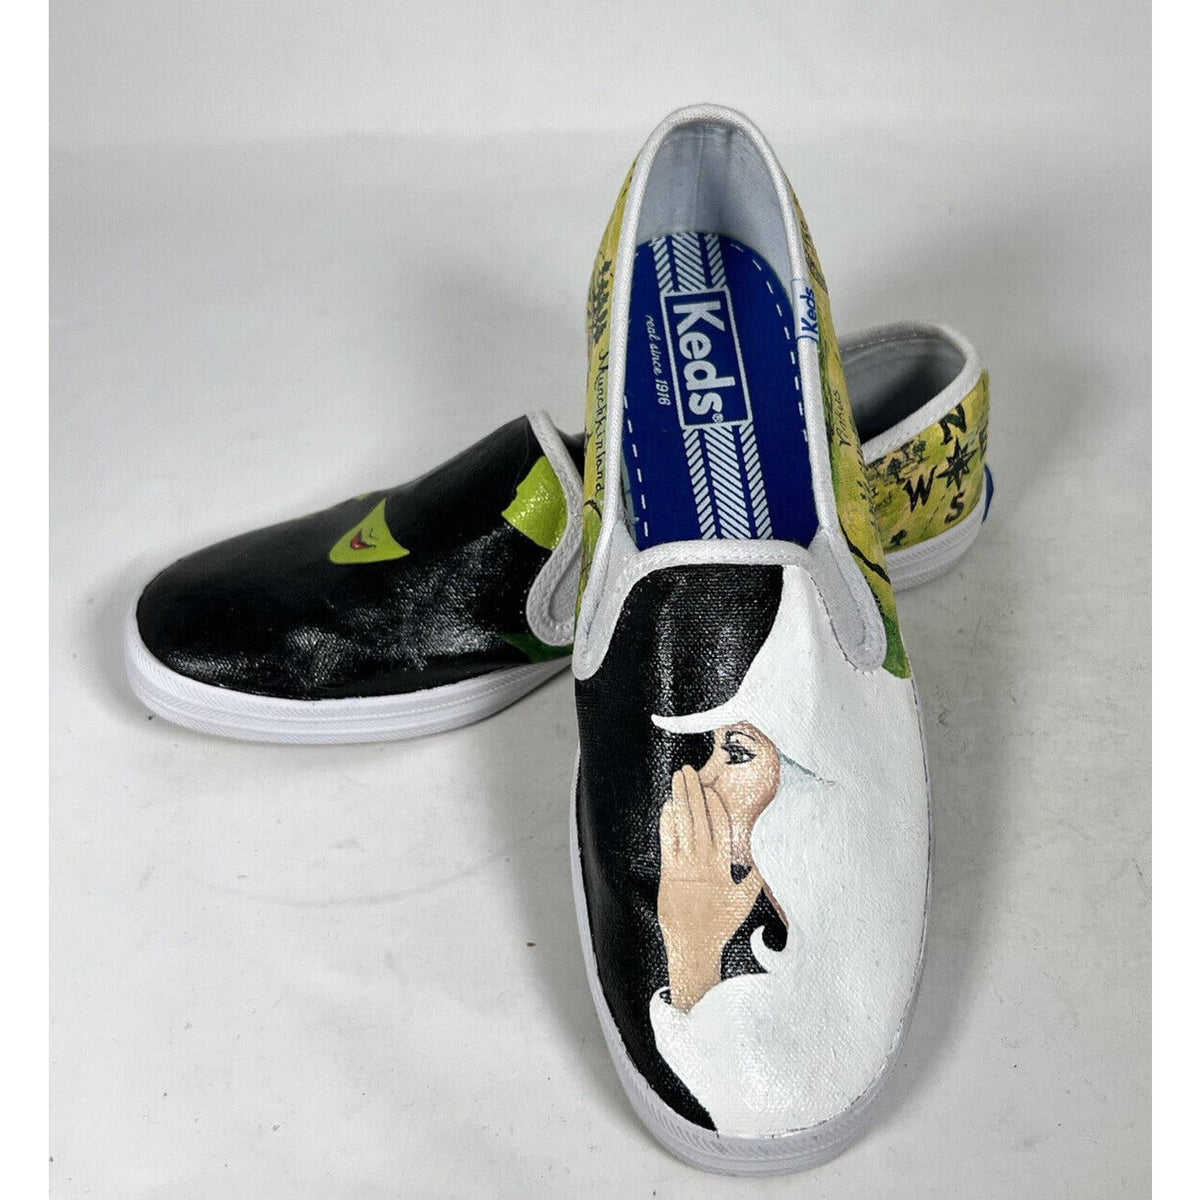 Wicked The Musical Play Hand Painted Keds Sneakers Sz.7